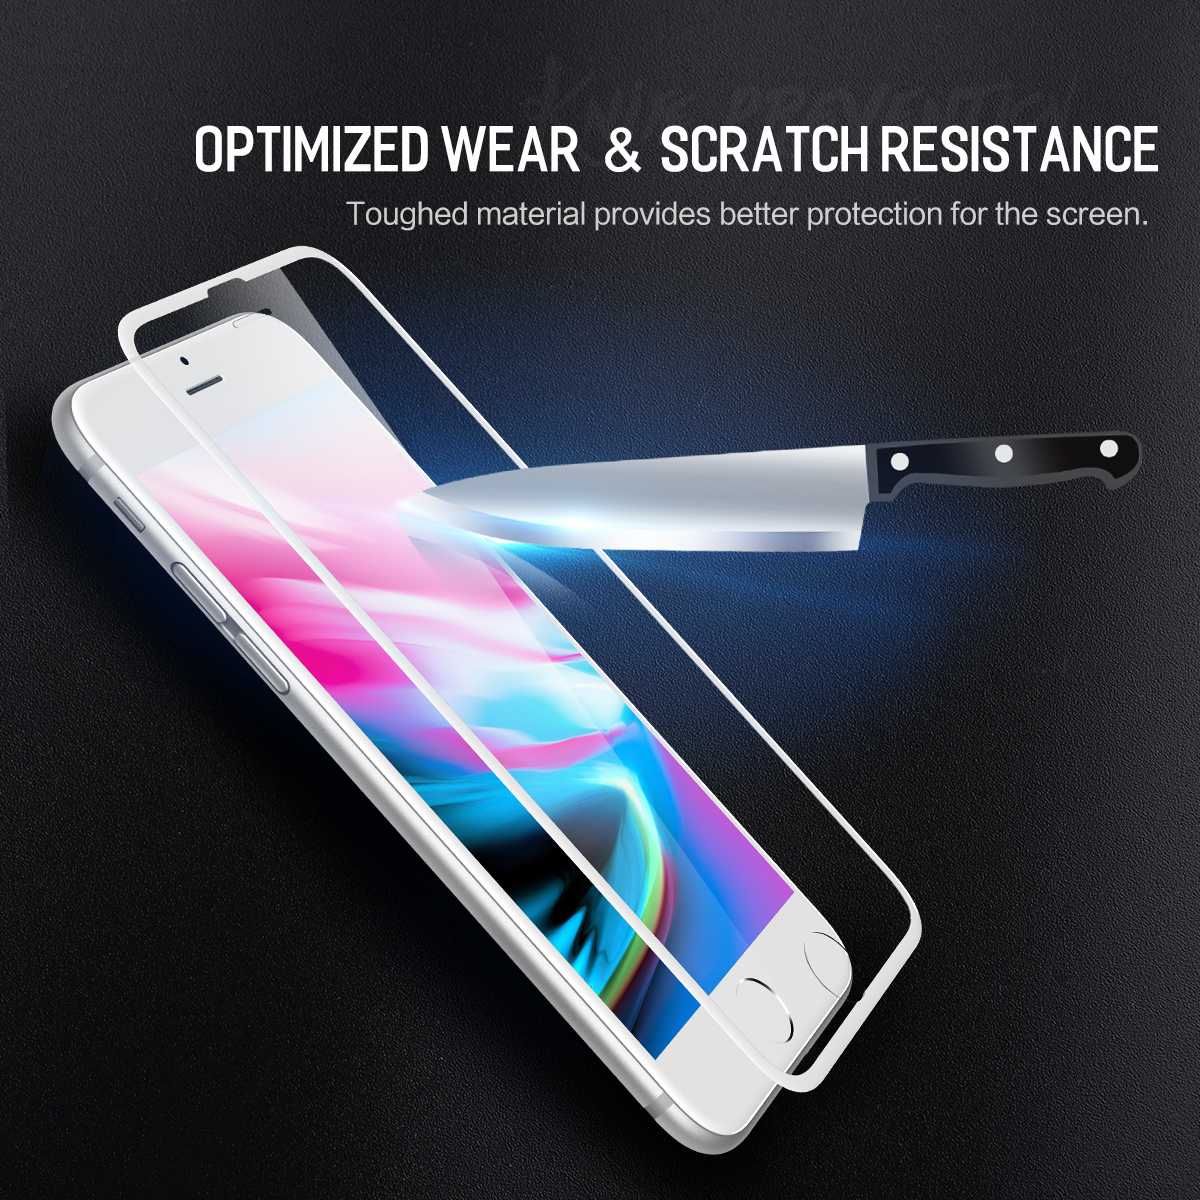 Rock-Tempered-Glass-Screen-Protector-For-iPhone-876s6-023mm-Anti-Blue-Light-Dustproof-Film-1291997-6